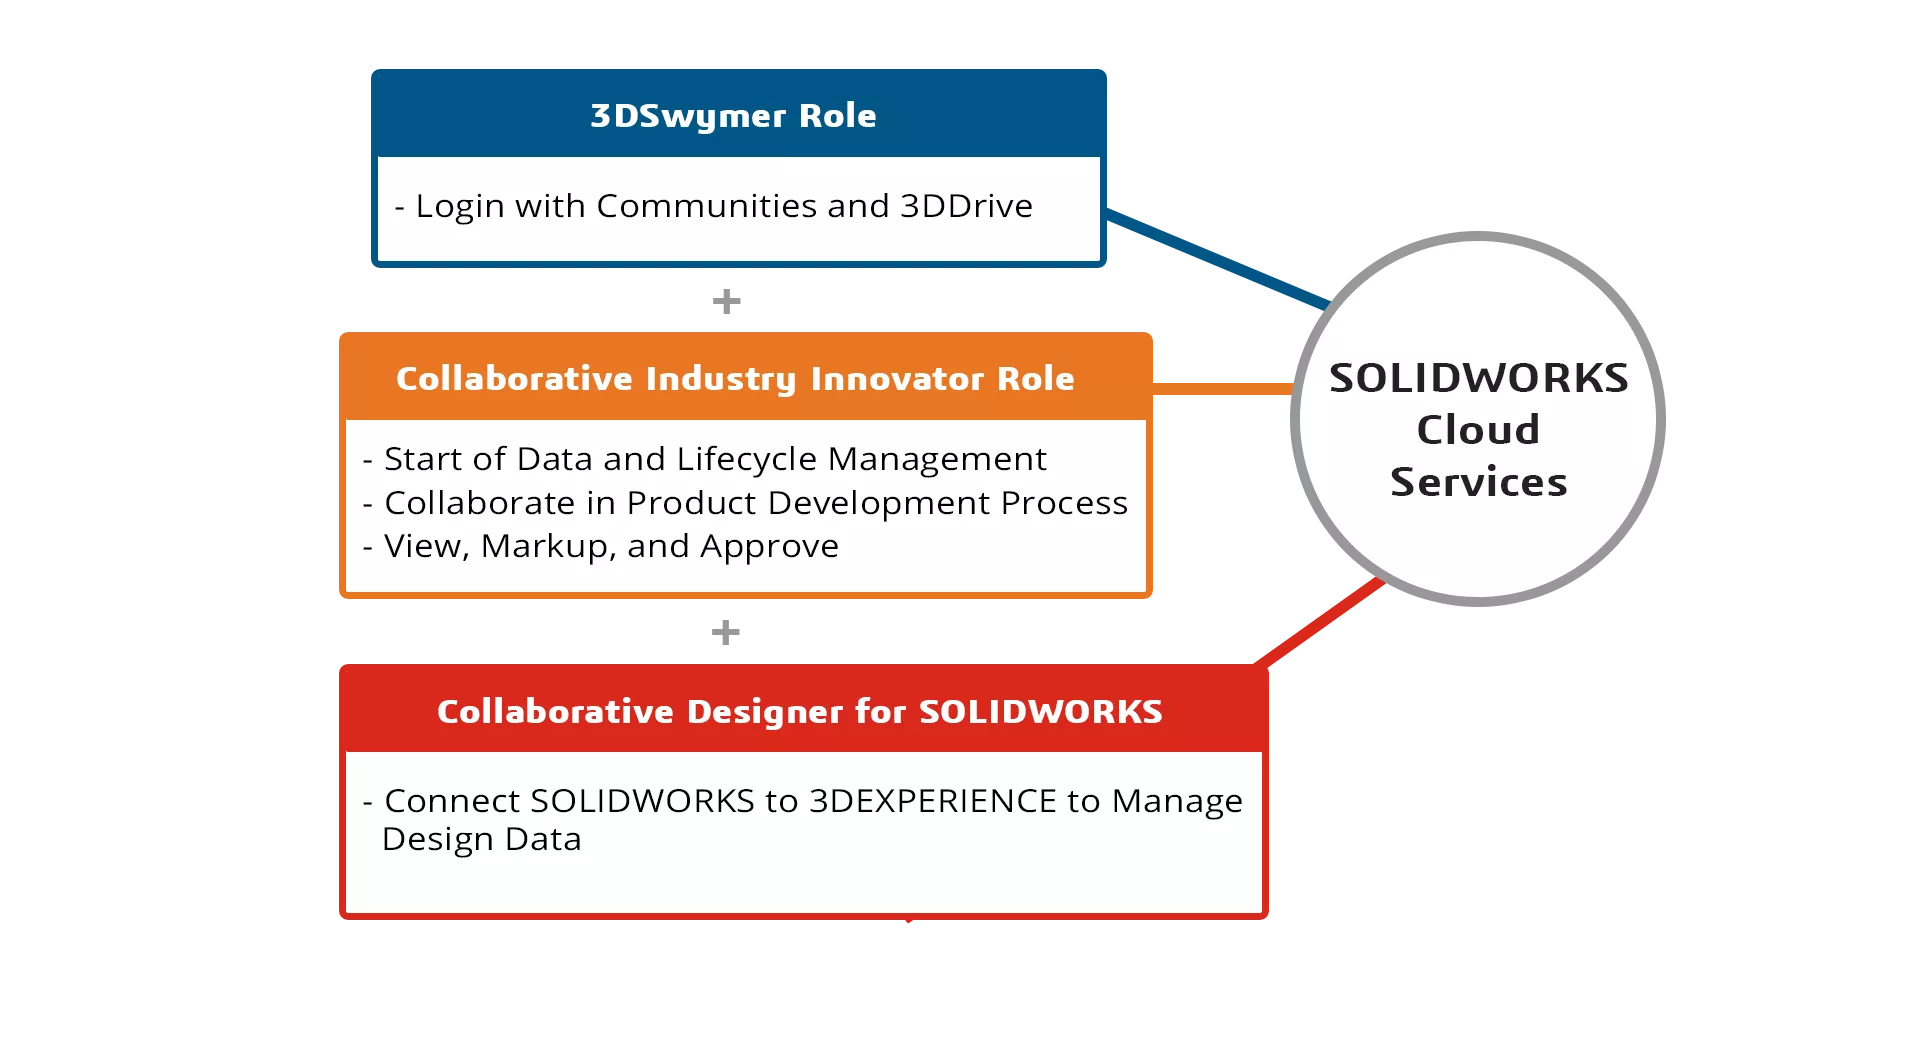 Get Pricing on 3DEXPERIENCE SOLIDWORKS Cloud Services from GoEngineer!